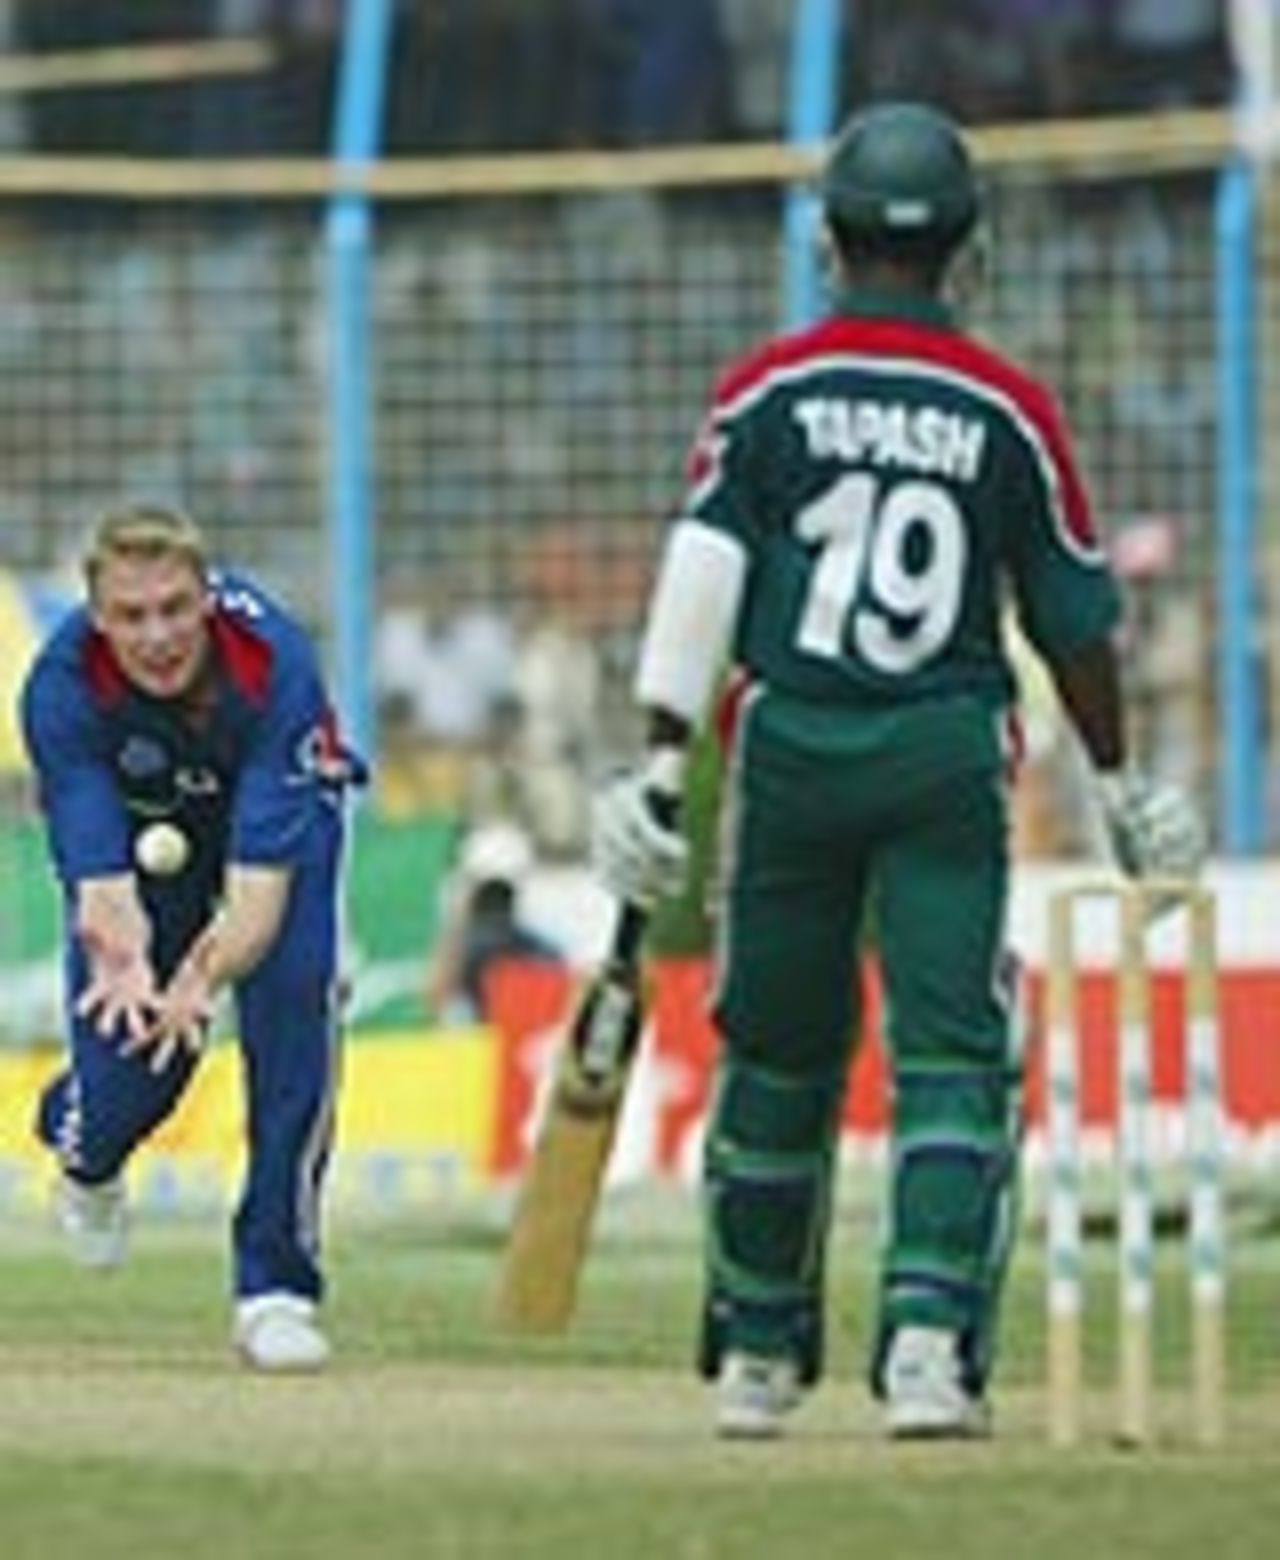 Flintoff takes a return catch to complete a career-best 4-14